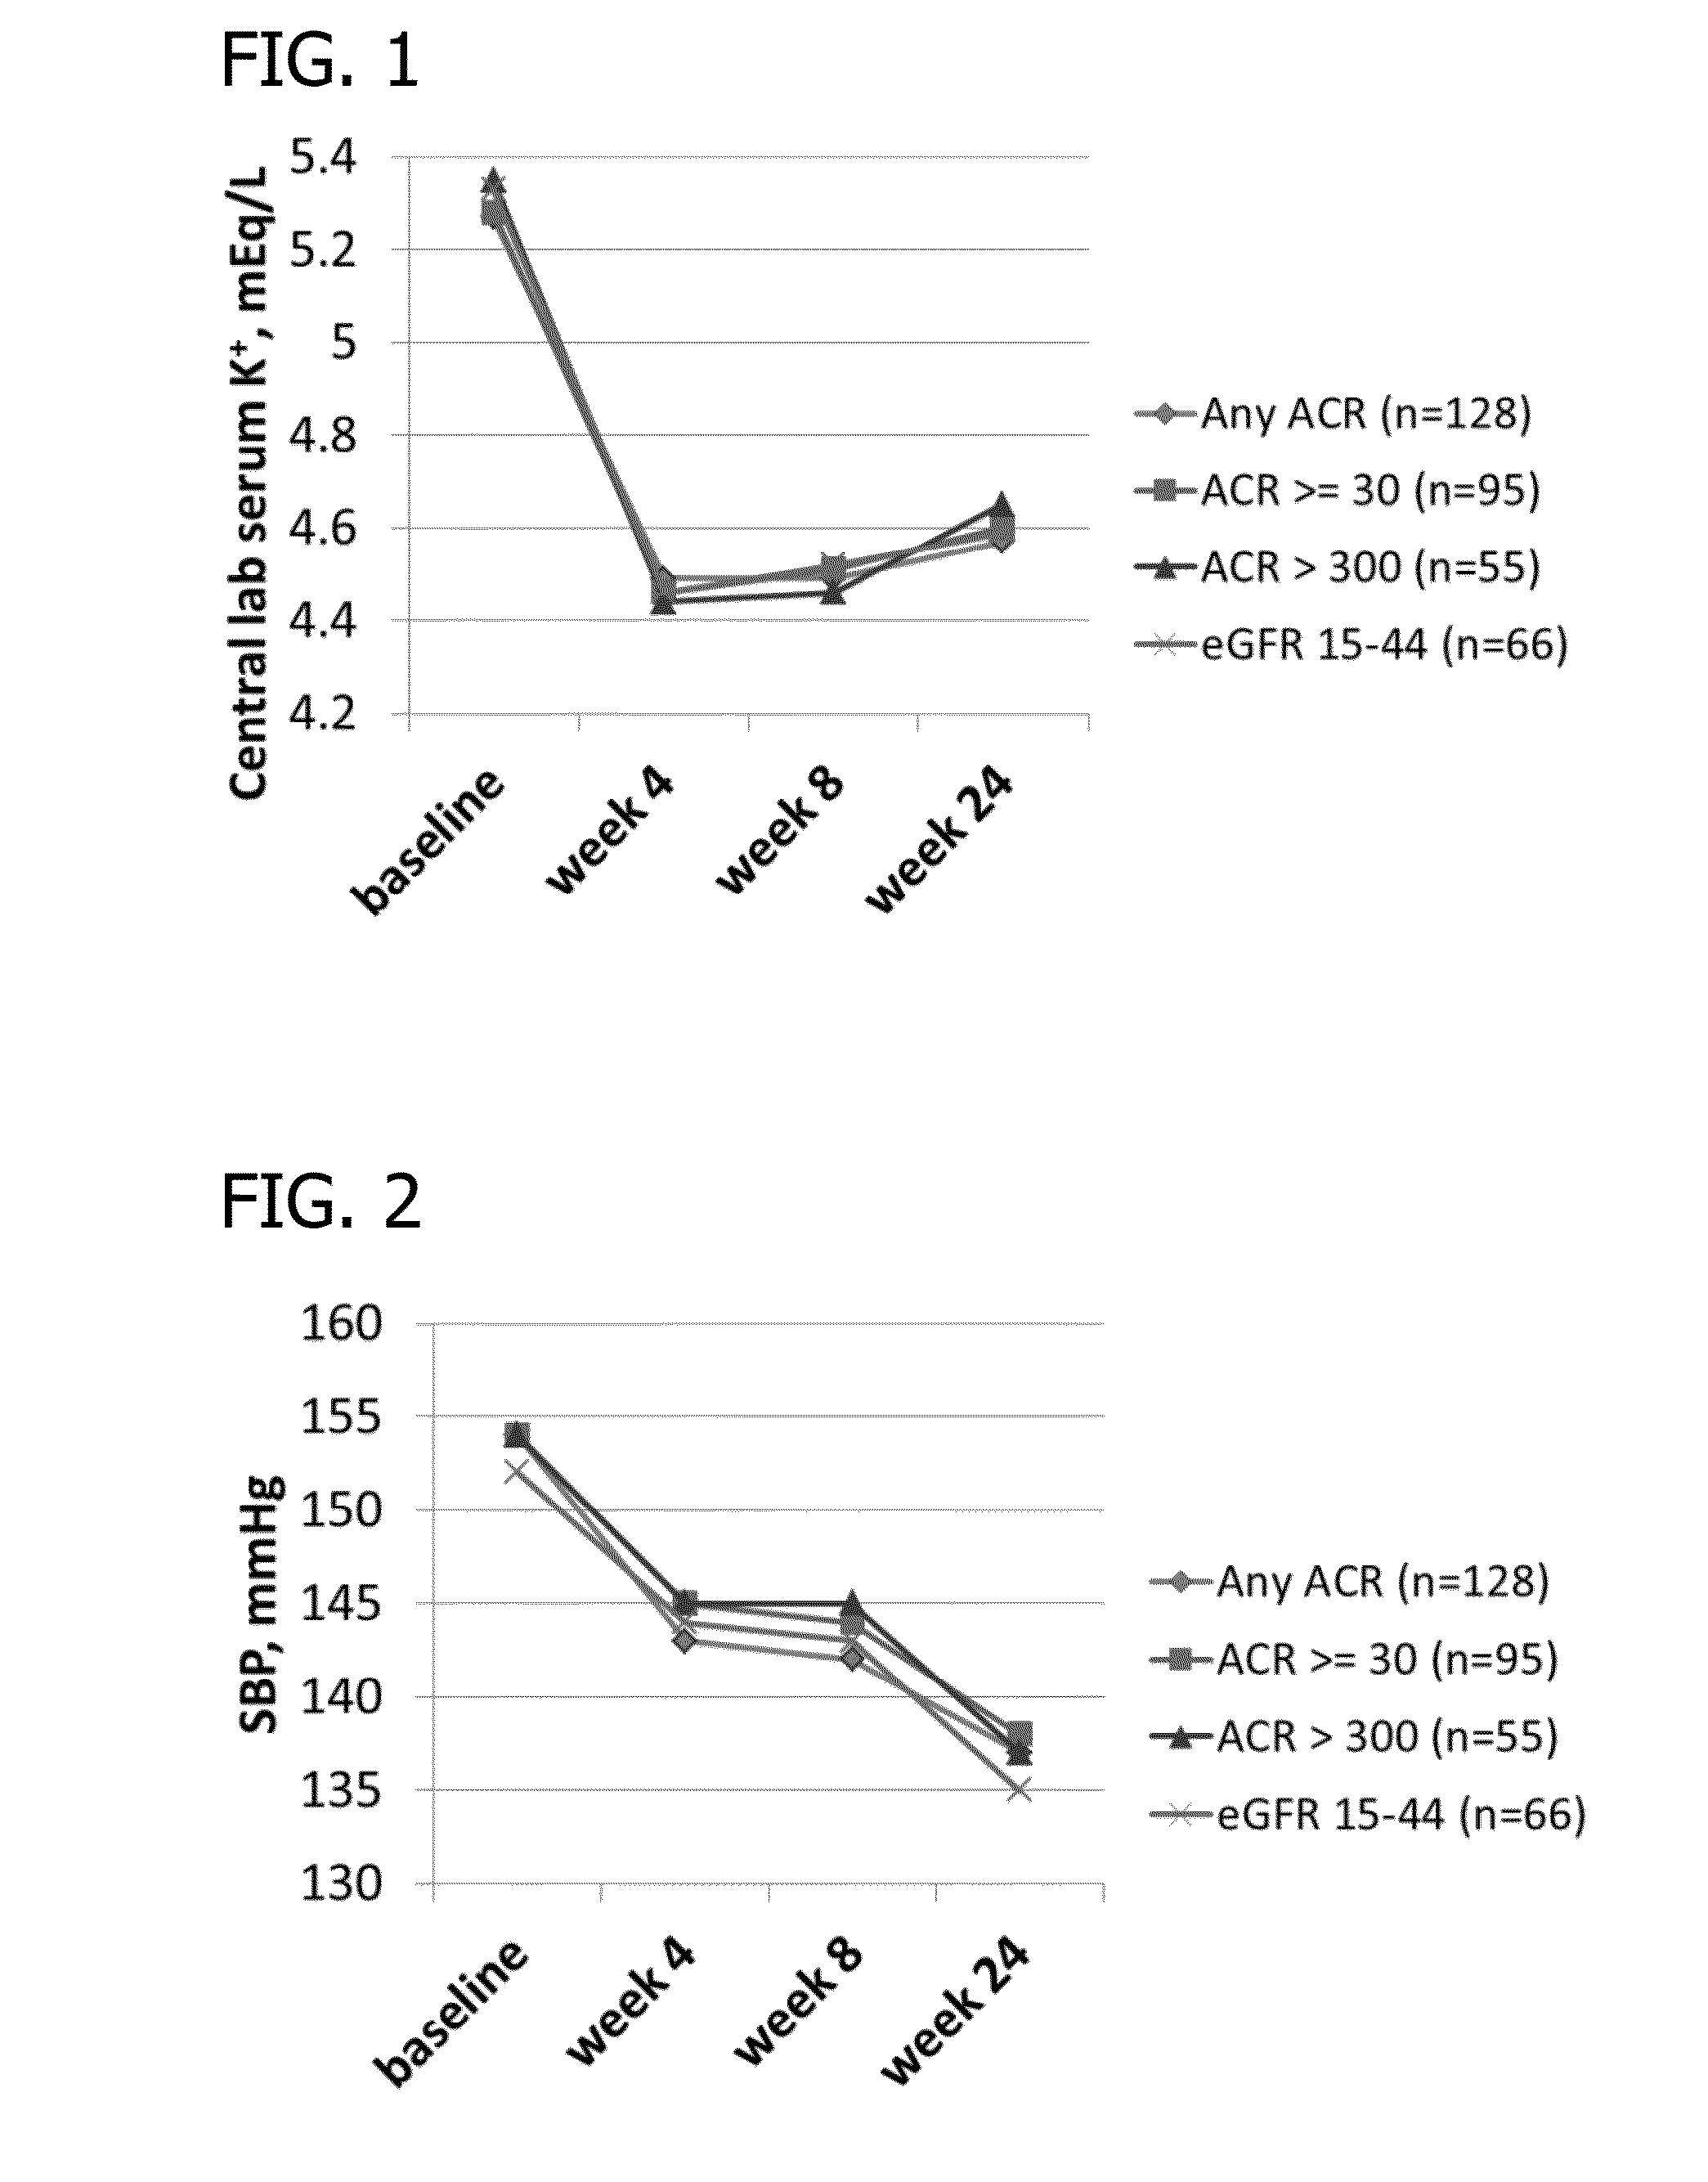 Potassium binding polymers for treating hypertension and hyperkalemia